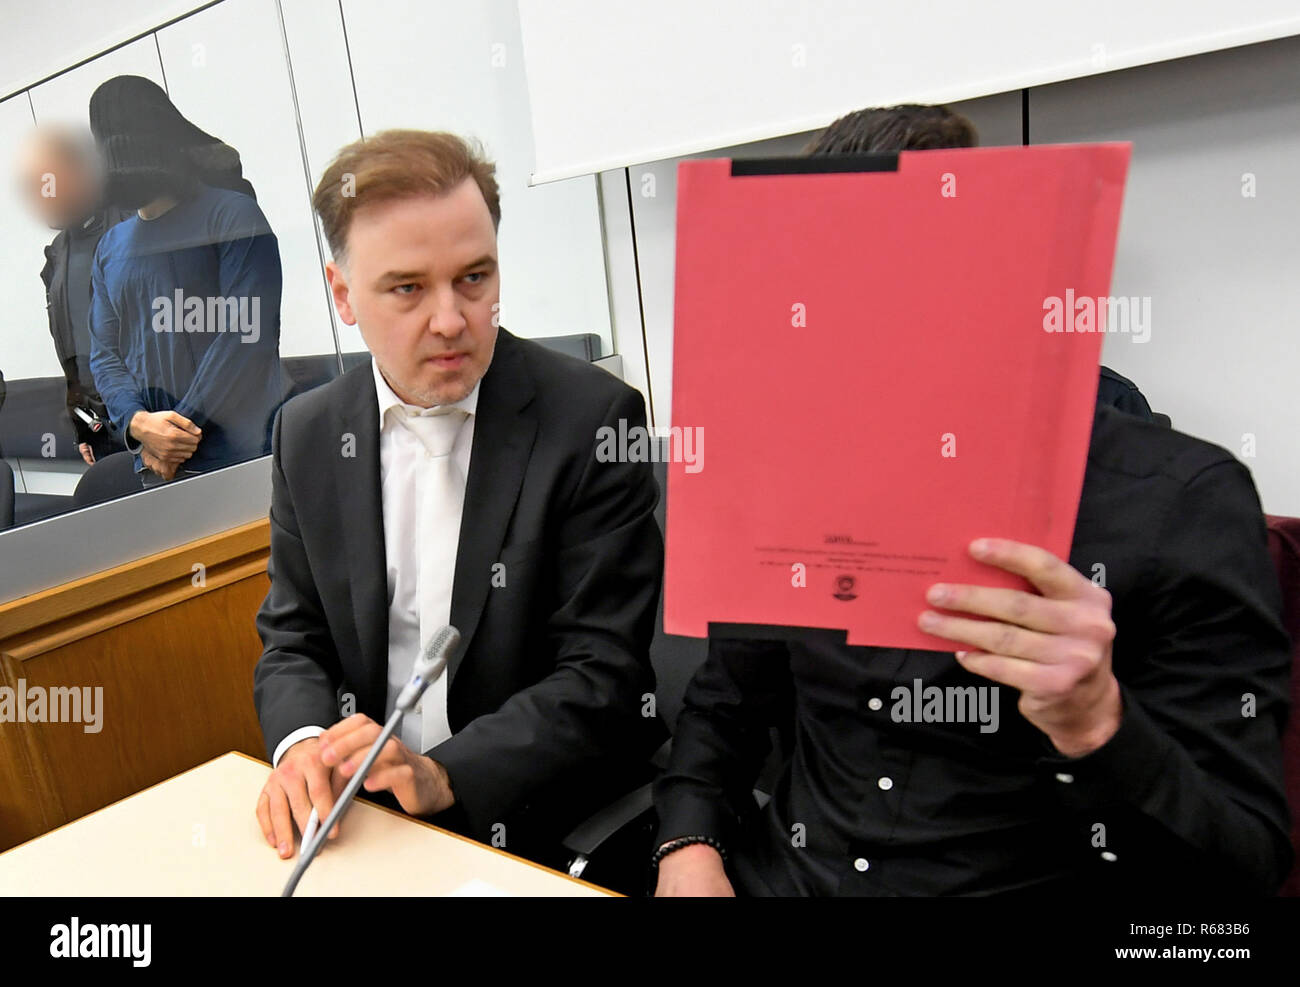 Celle, Lower Saxony. 04th Dec, 2018. A witness for the prosecution covers his face in a courtroom of the Higher Regional Court next to his defender Burkhard Benecken. The witness is to be heard from this Tuesday. He is one of the convicted juvenile assassins of the Sikh Temple in Essen in 2016 with three injured. In the background is Abu Walaa, alleged leader of the terrorist militia Islamic State (IS) in Germany. Walaa and four other alleged top Islamists on trial are said to have recruited volunteers for the IS. Credit: Holger Hollemann/dpa/Alamy Live News Stock Photo